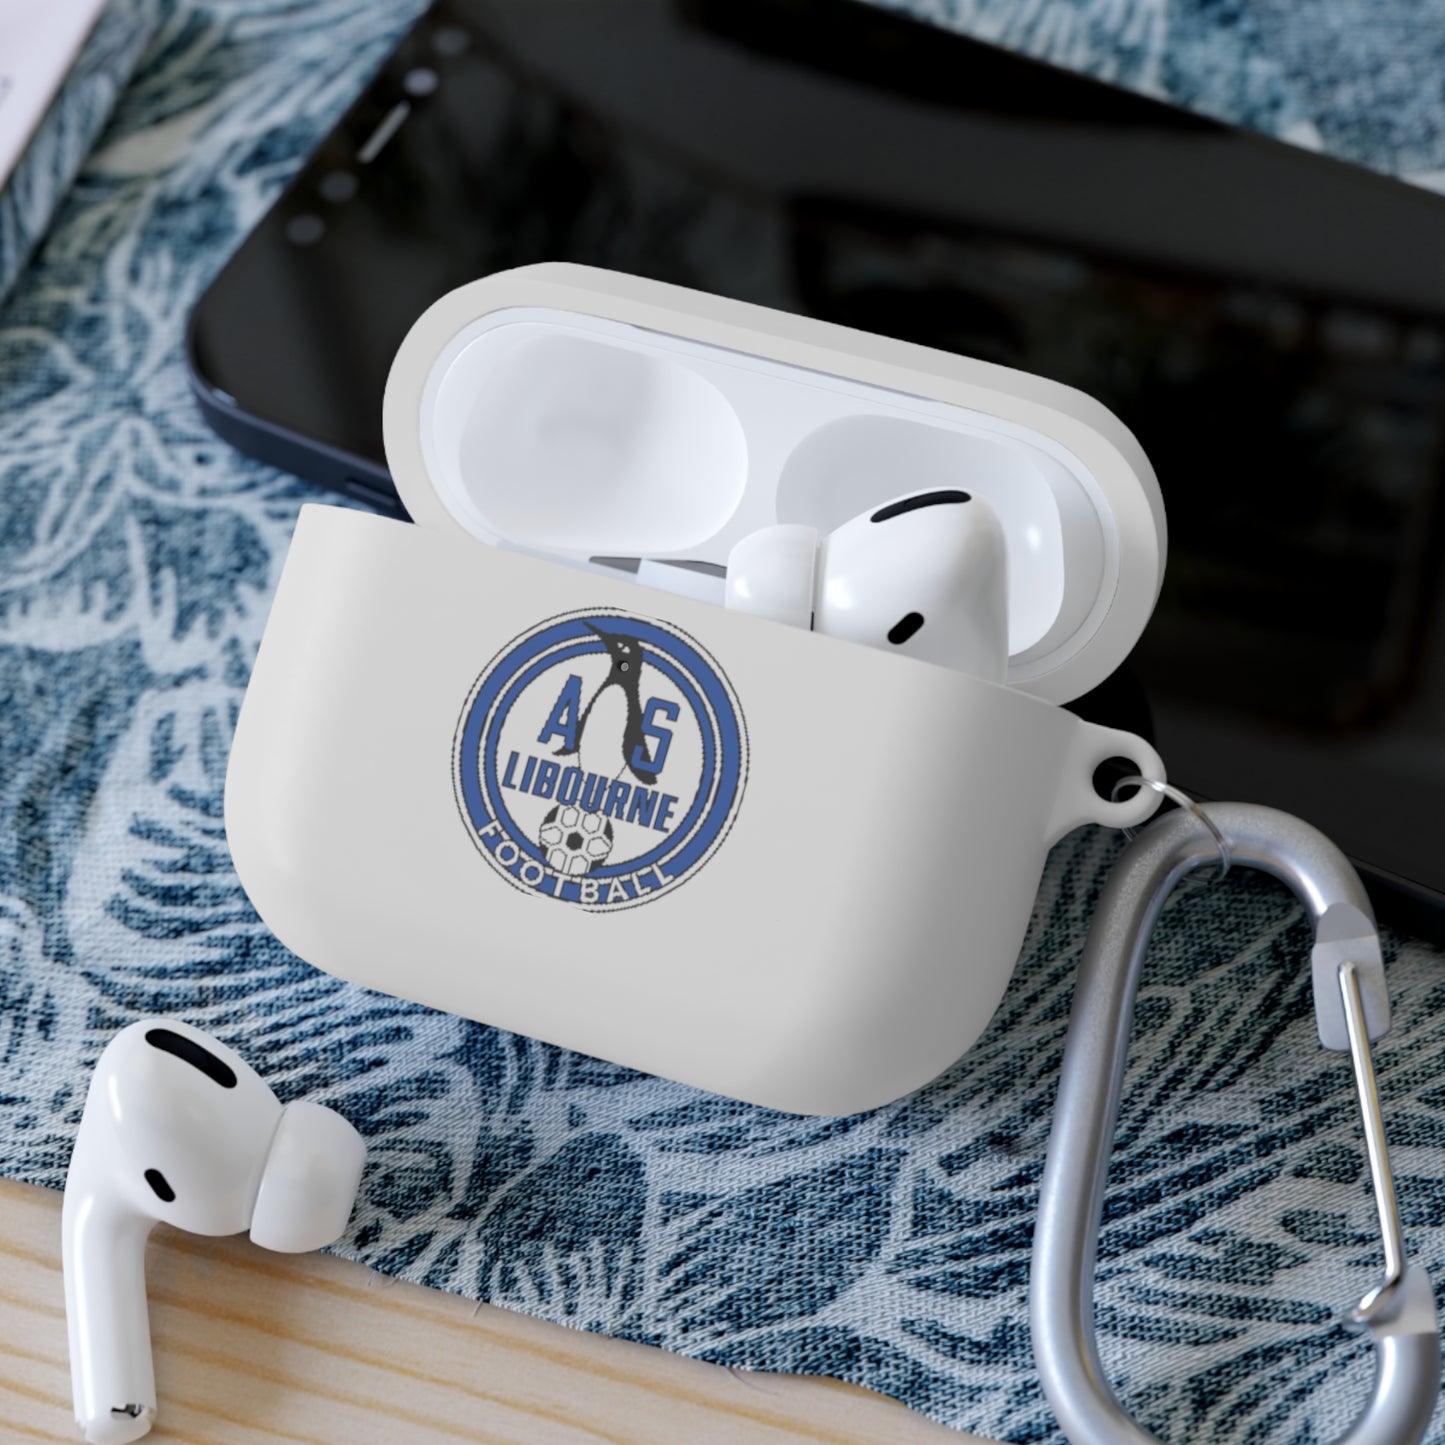 AS Libourne AirPods and AirPods Pro Case Cover